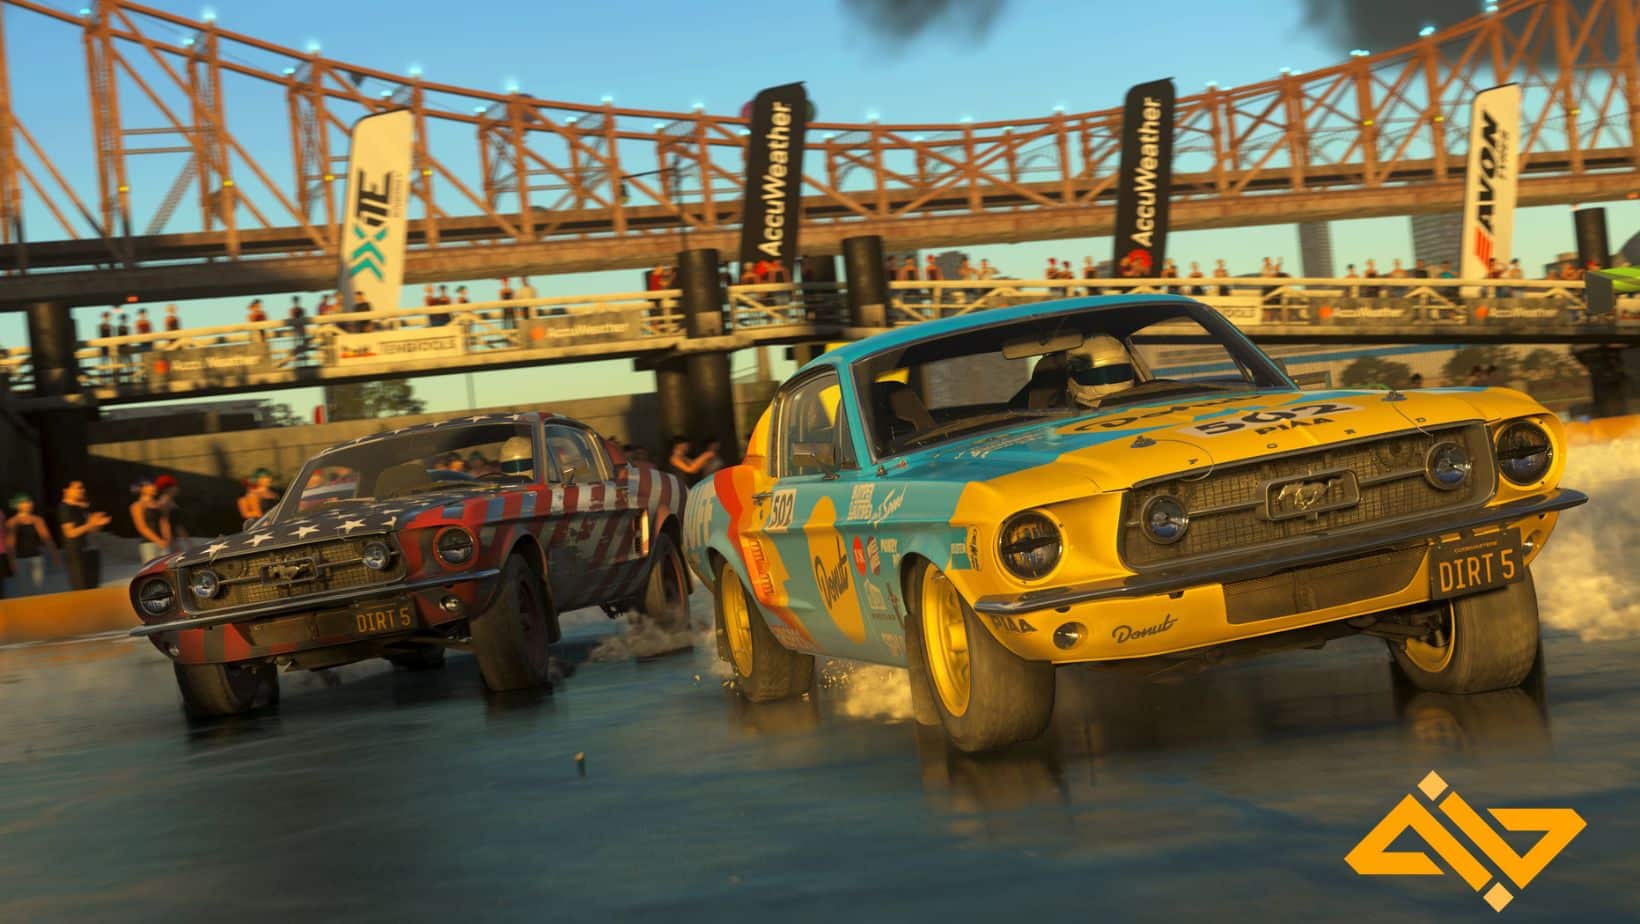 Dirt 5 ditches the franchises’ simulation experience in favor of a more arcade-focused racing game. 